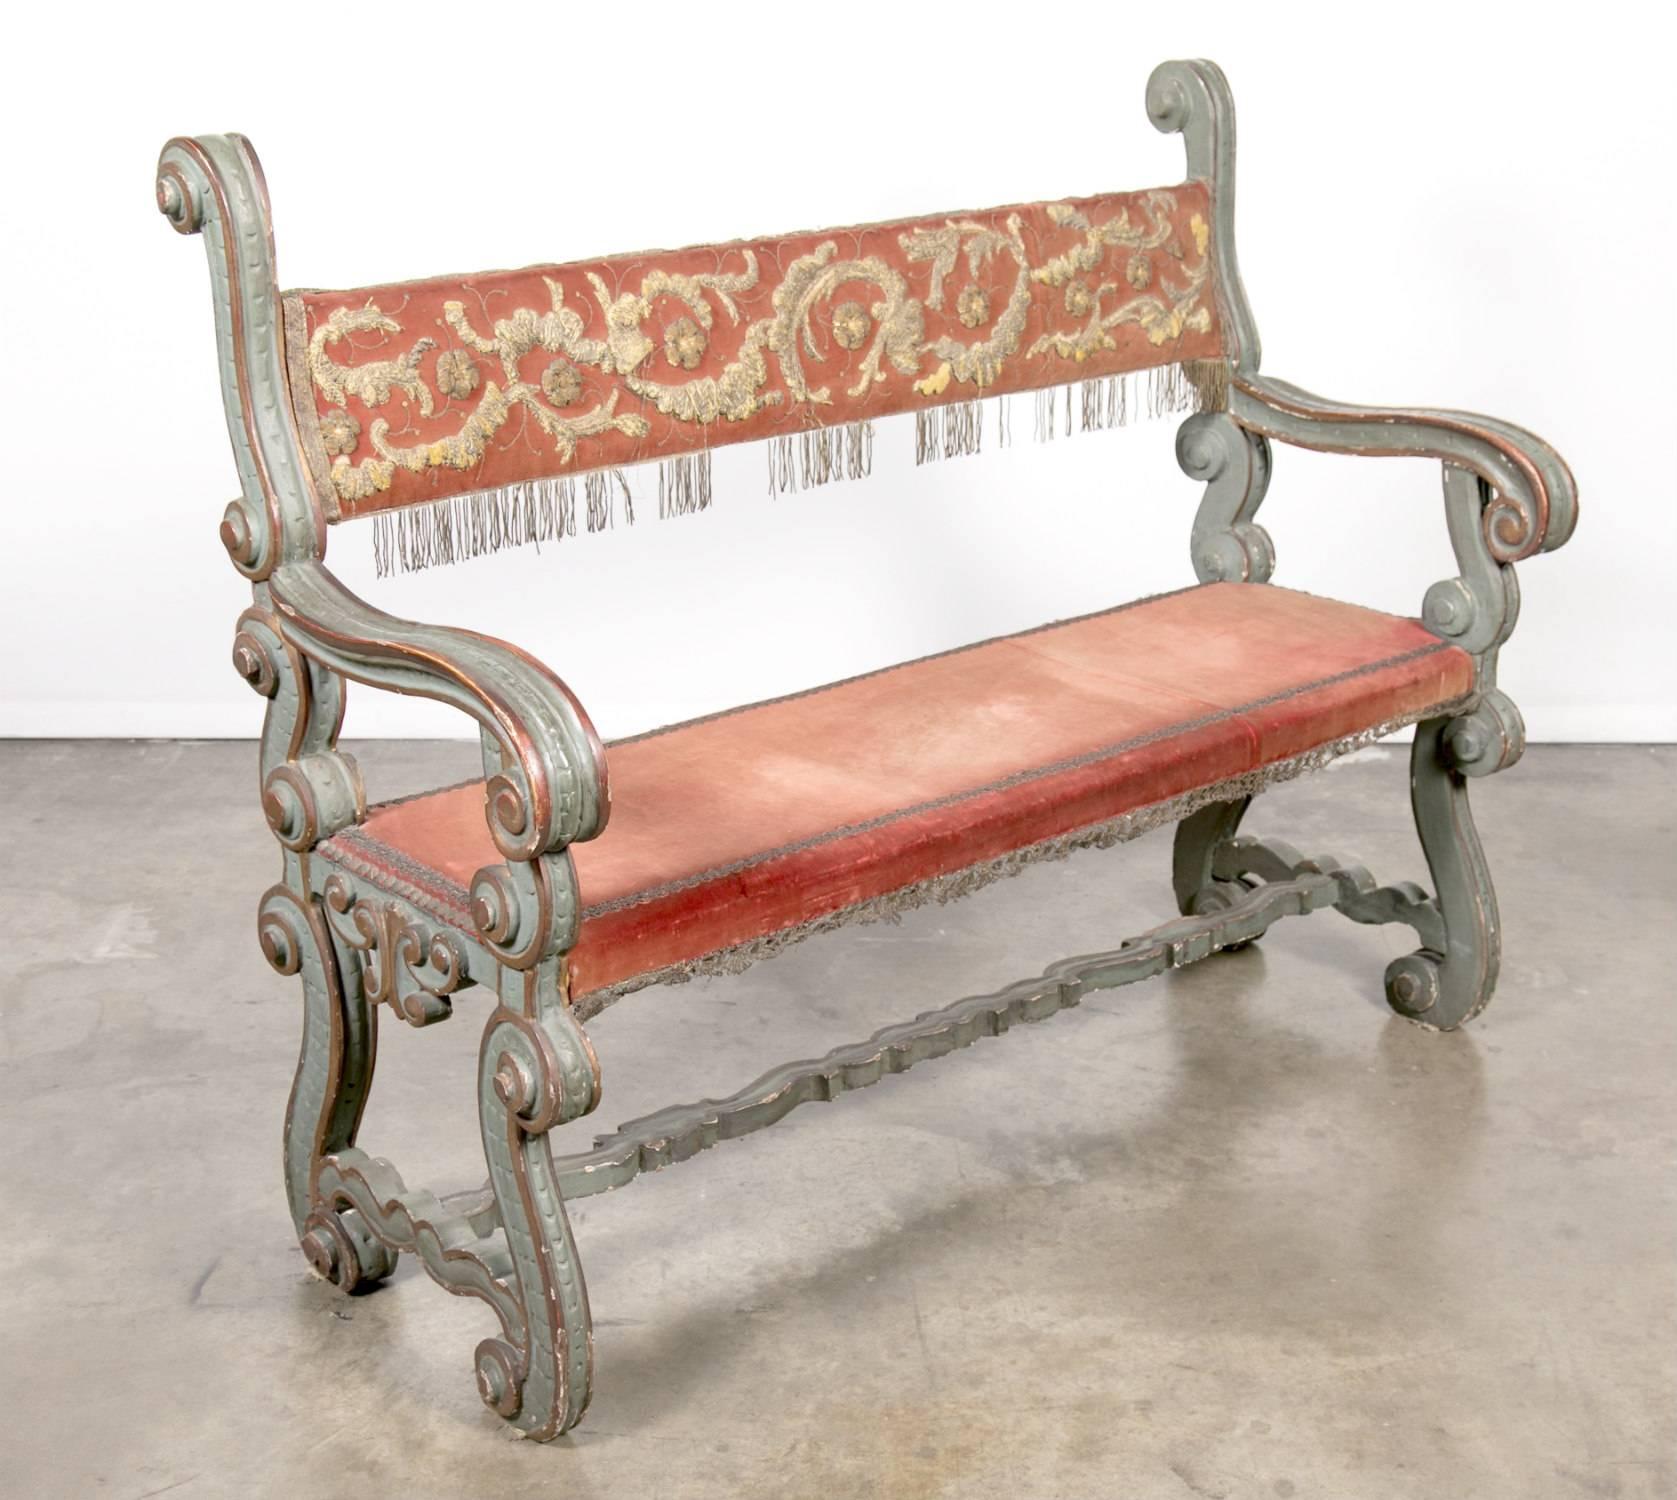 Pair of 18th Century Carved and Painted Baroque Tuscan Arm Benches (Barock)